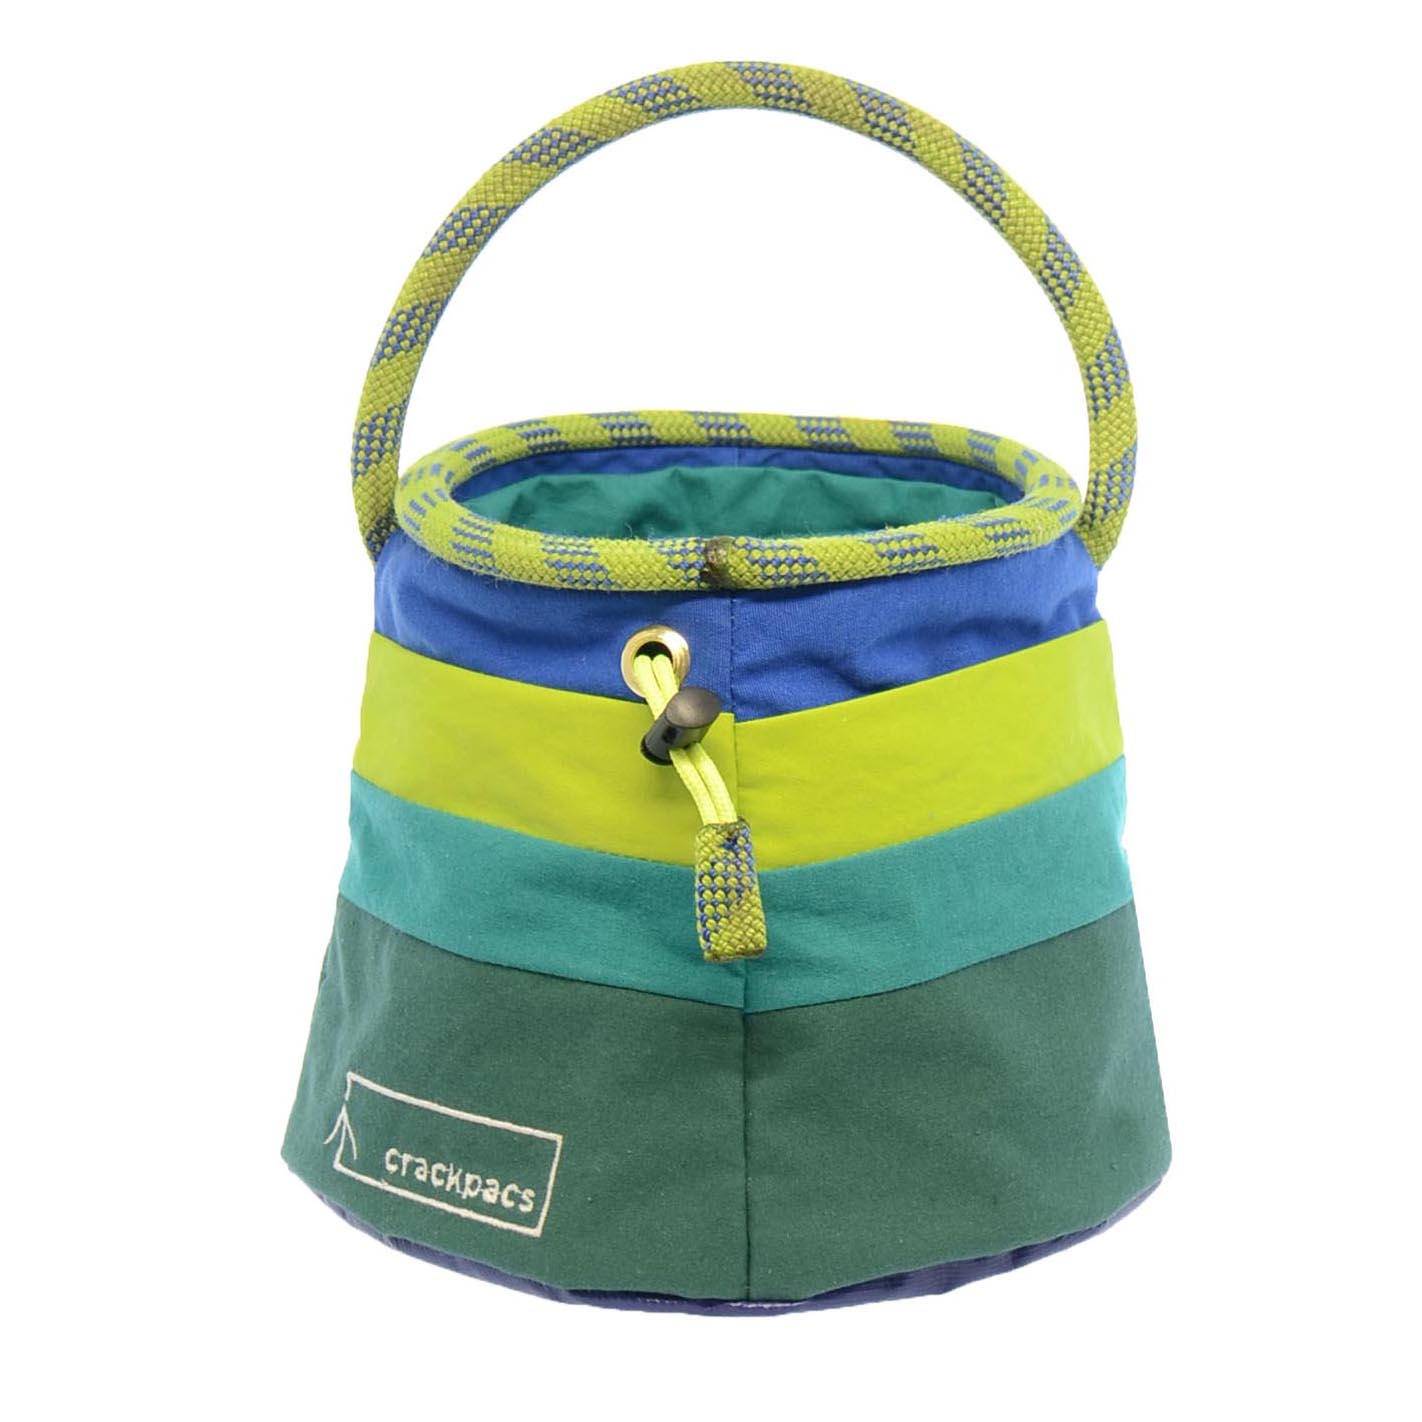 Upcycled boulder bucket chalk bag - one off creations by crackpacs